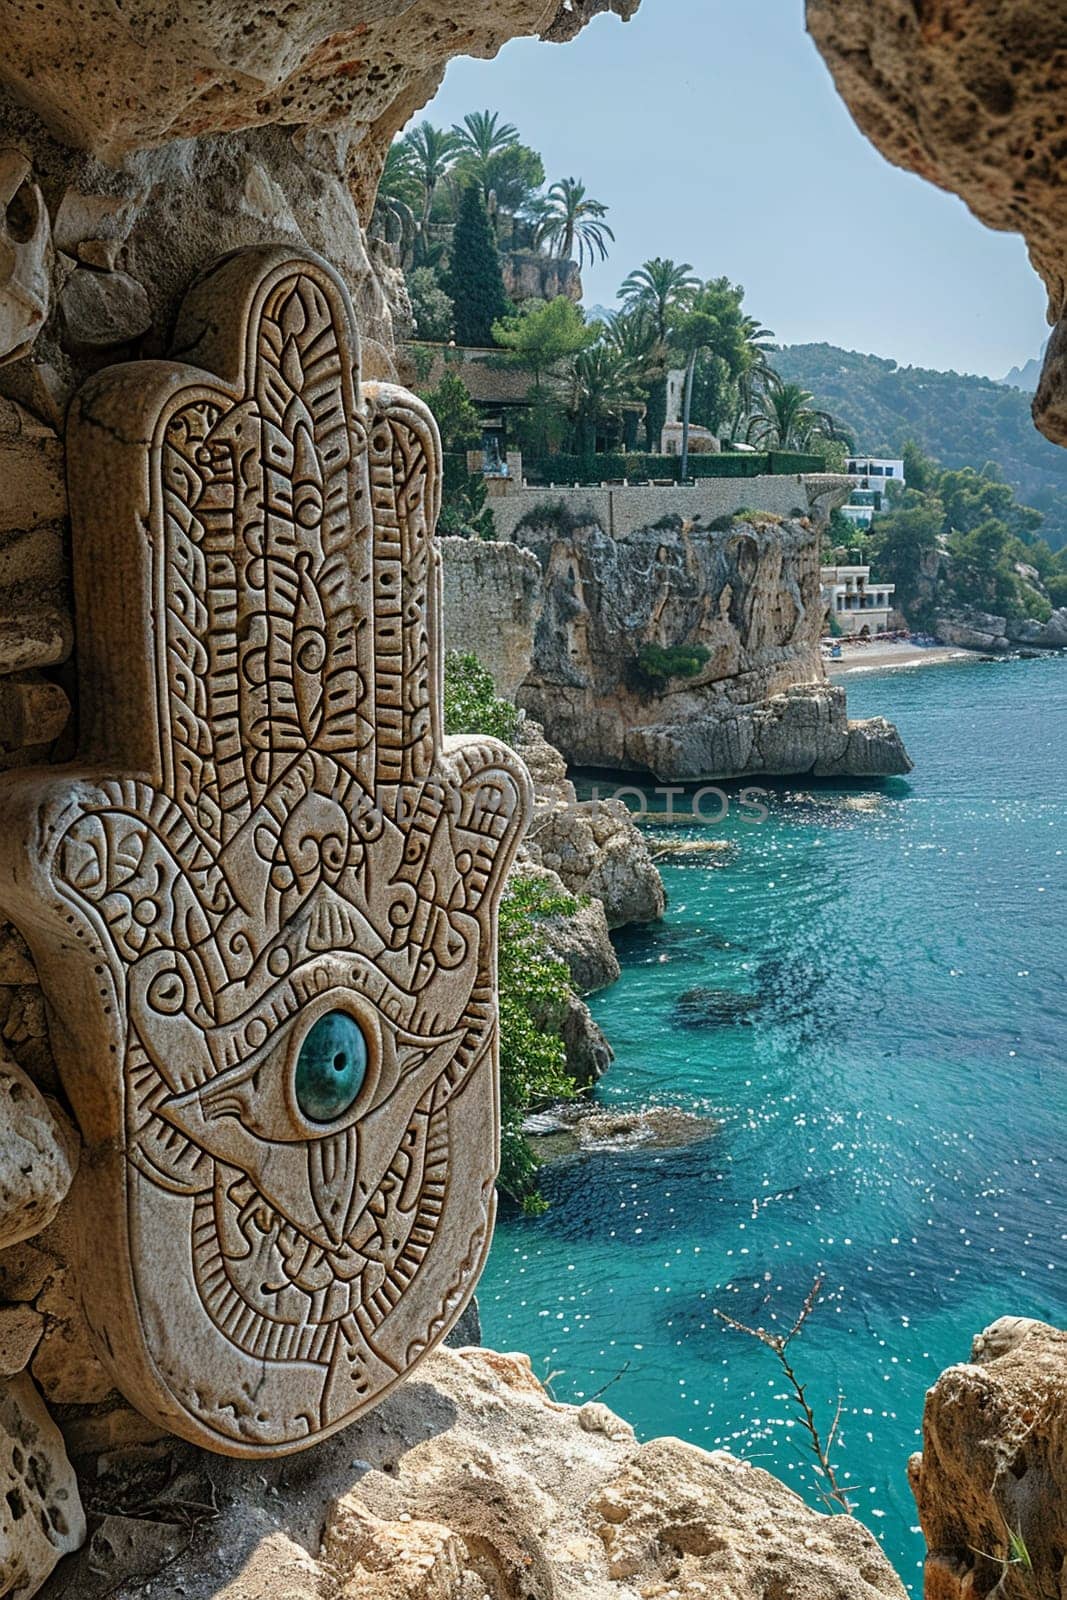 Hamsa Hand Amulets Overlooking a Mediterranean Seascape The protective symbols blur with the sea by Benzoix